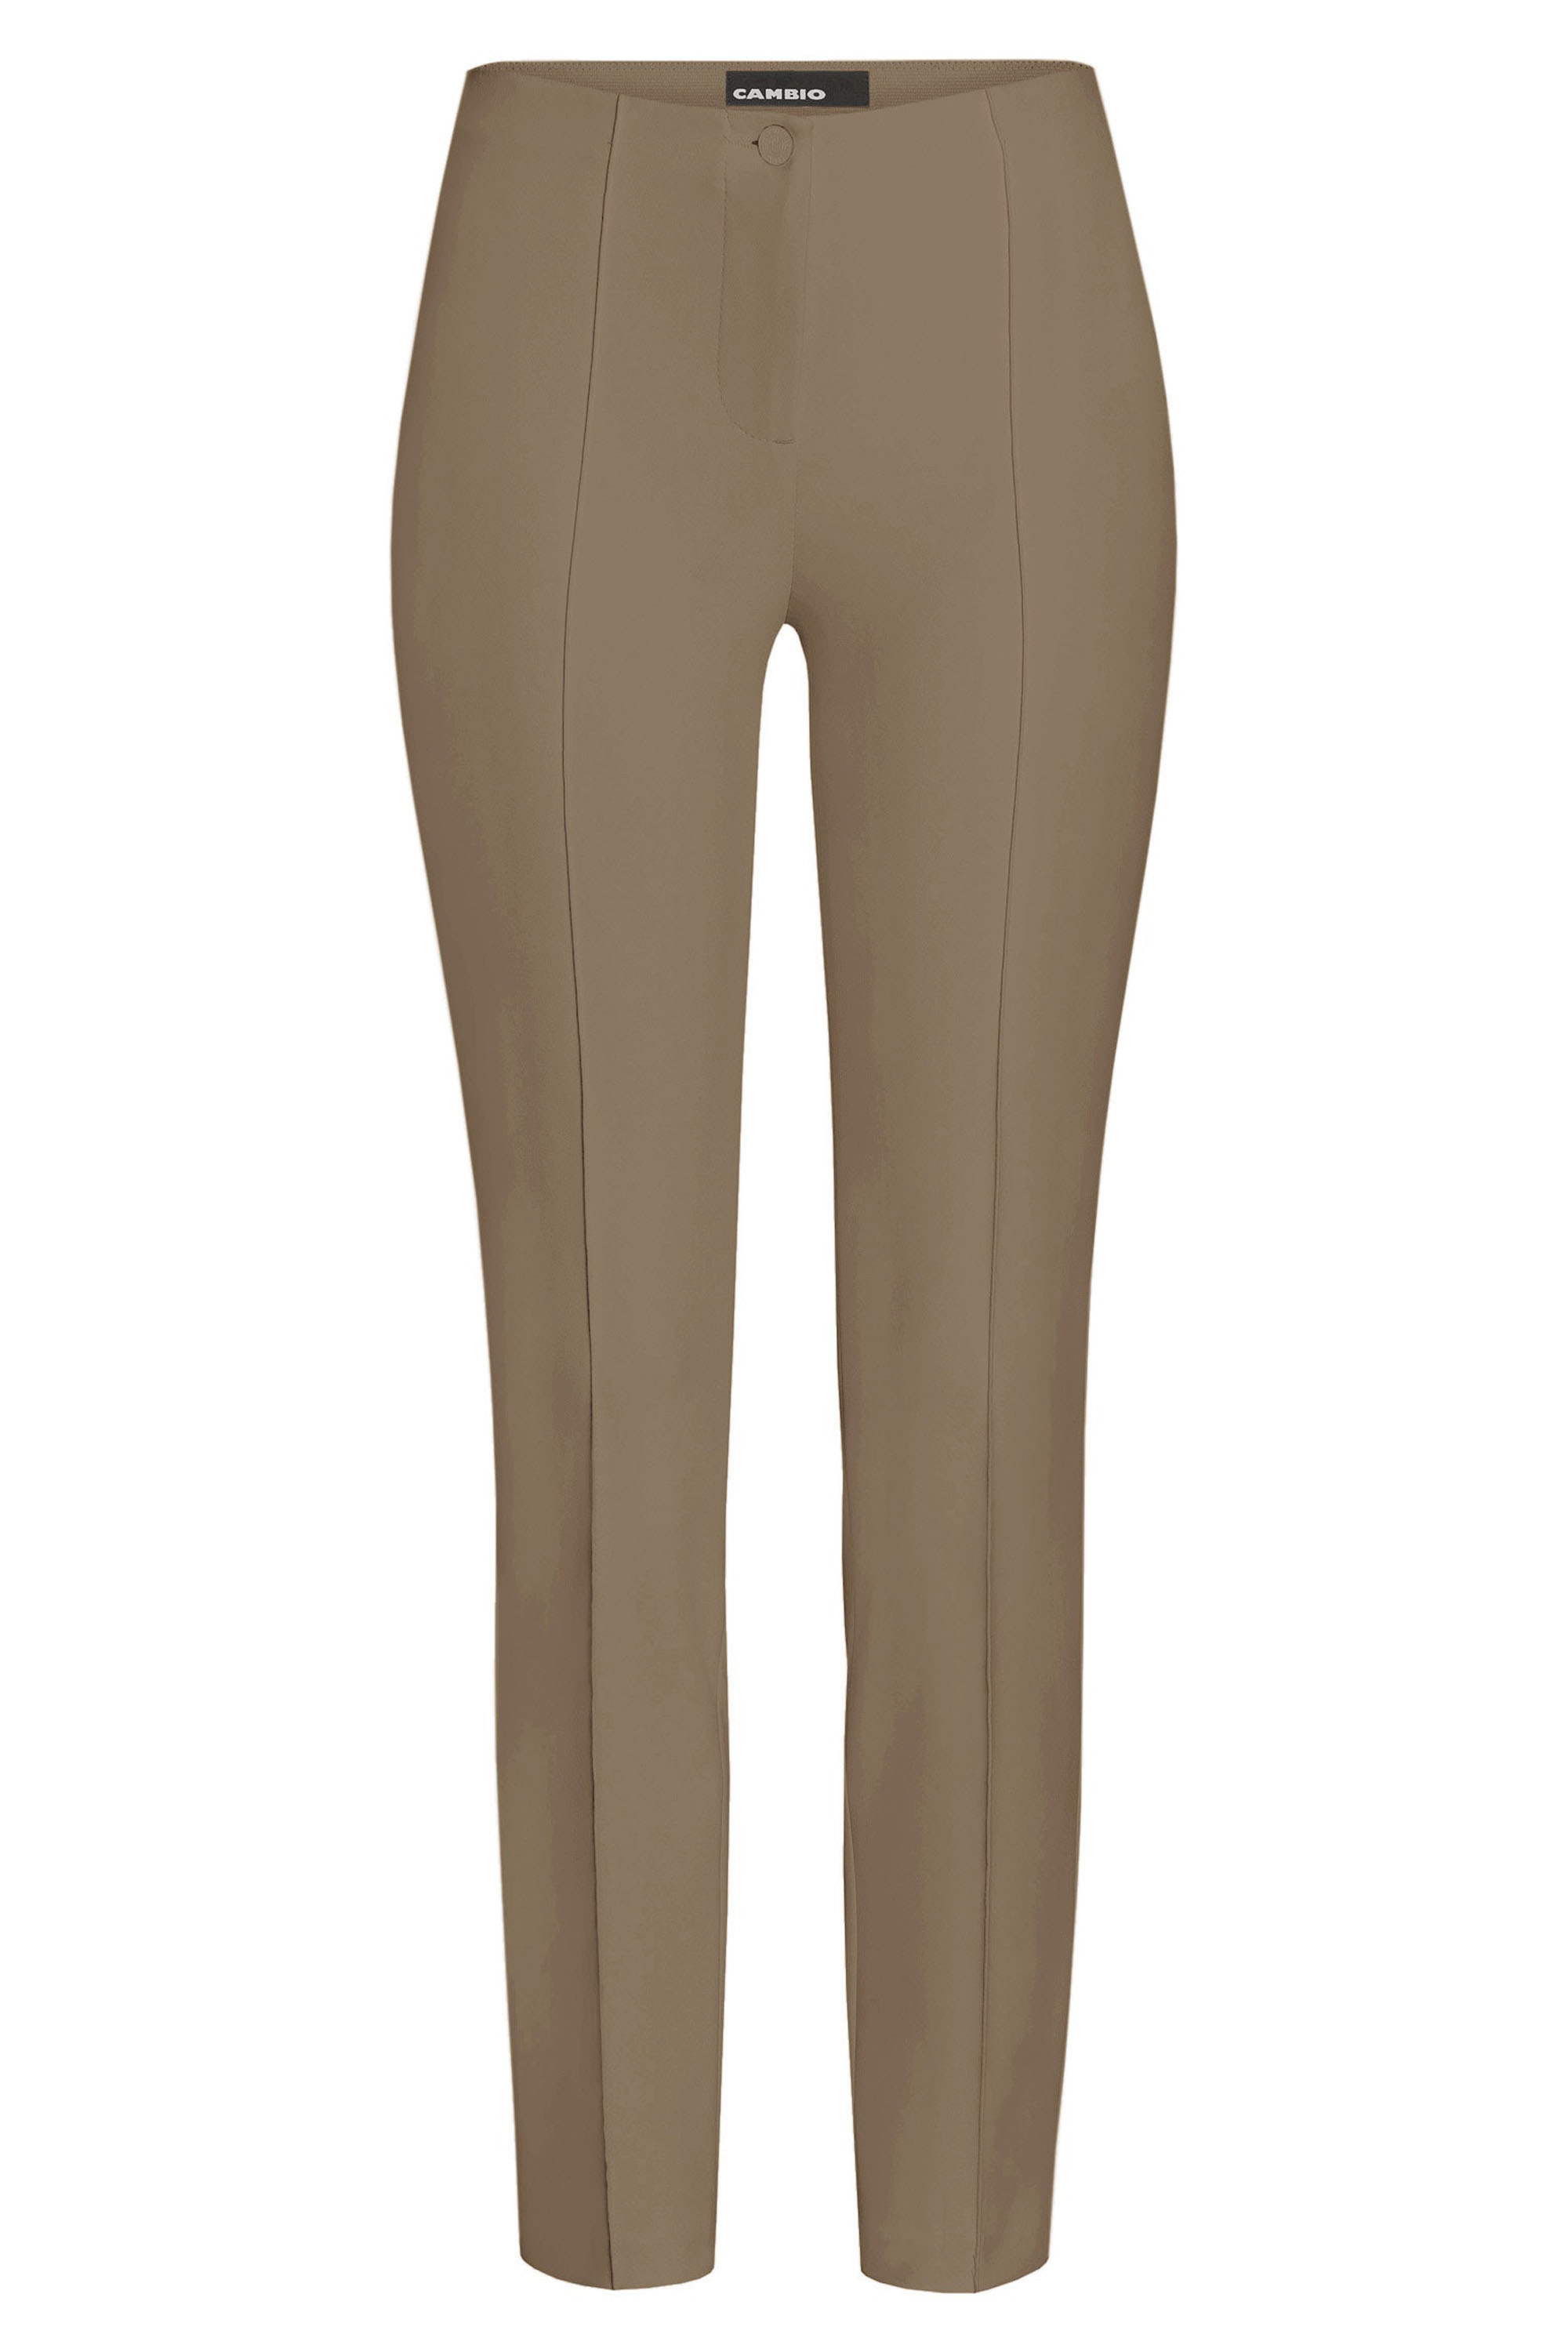 Cambio trousers ROS 6111-0202-00 Camel by Penninkhoffashion.com